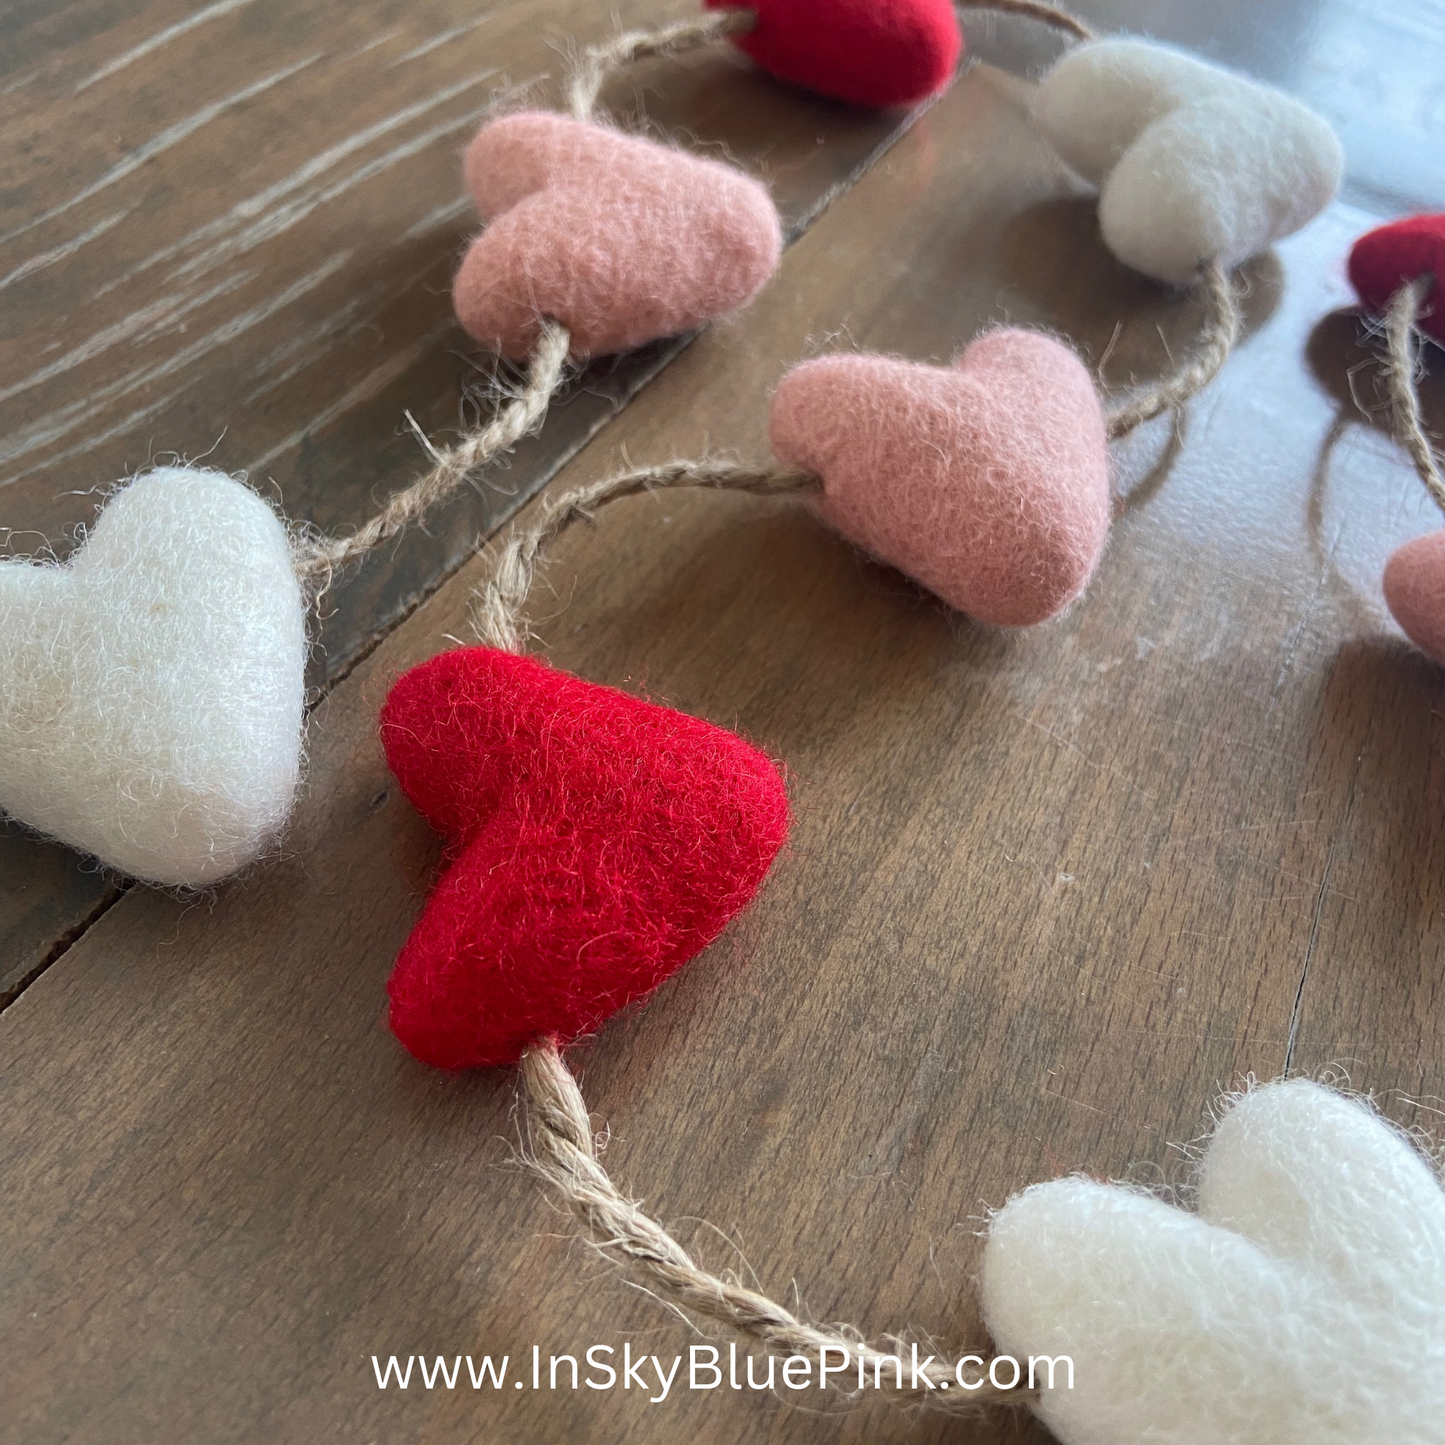 Felted Wool Hearts Garland-Red, Pink, White 4-foot Valentine Decor